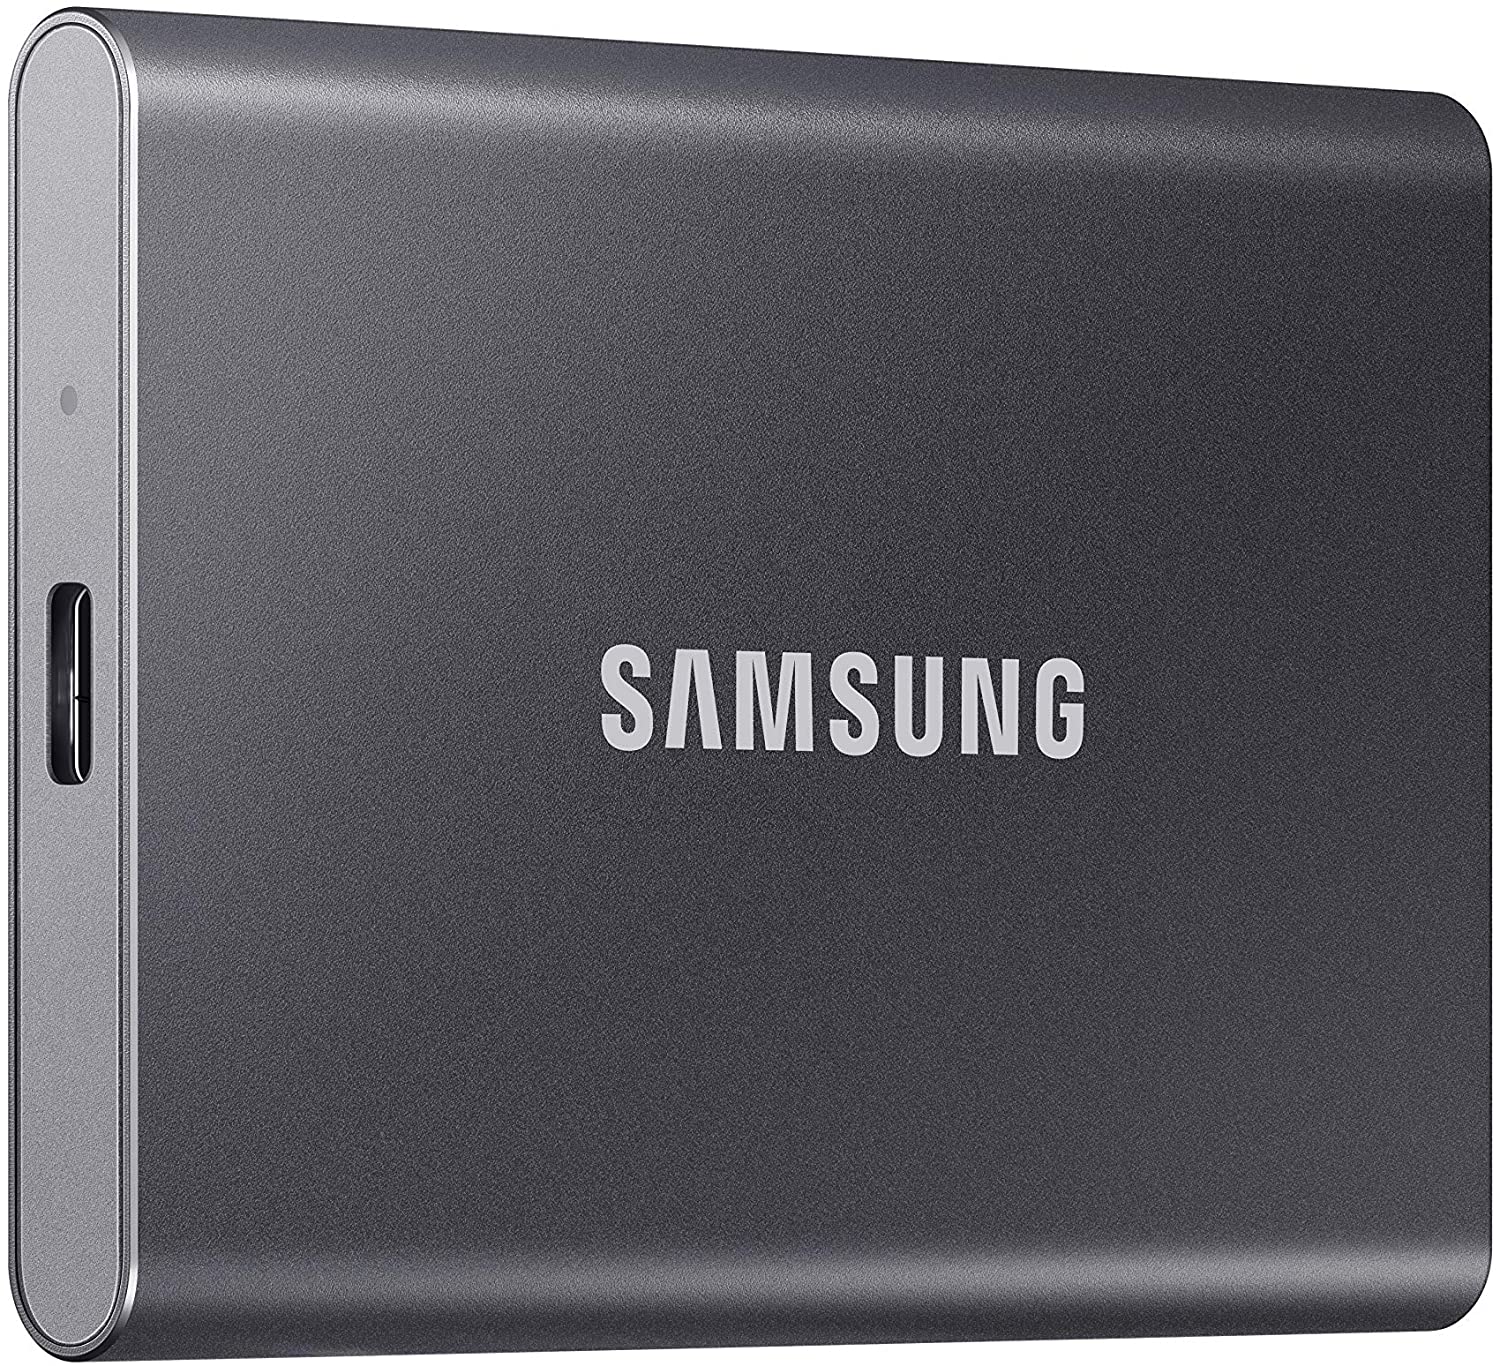 Samsung SSD T7 Portable External Solid State Drive